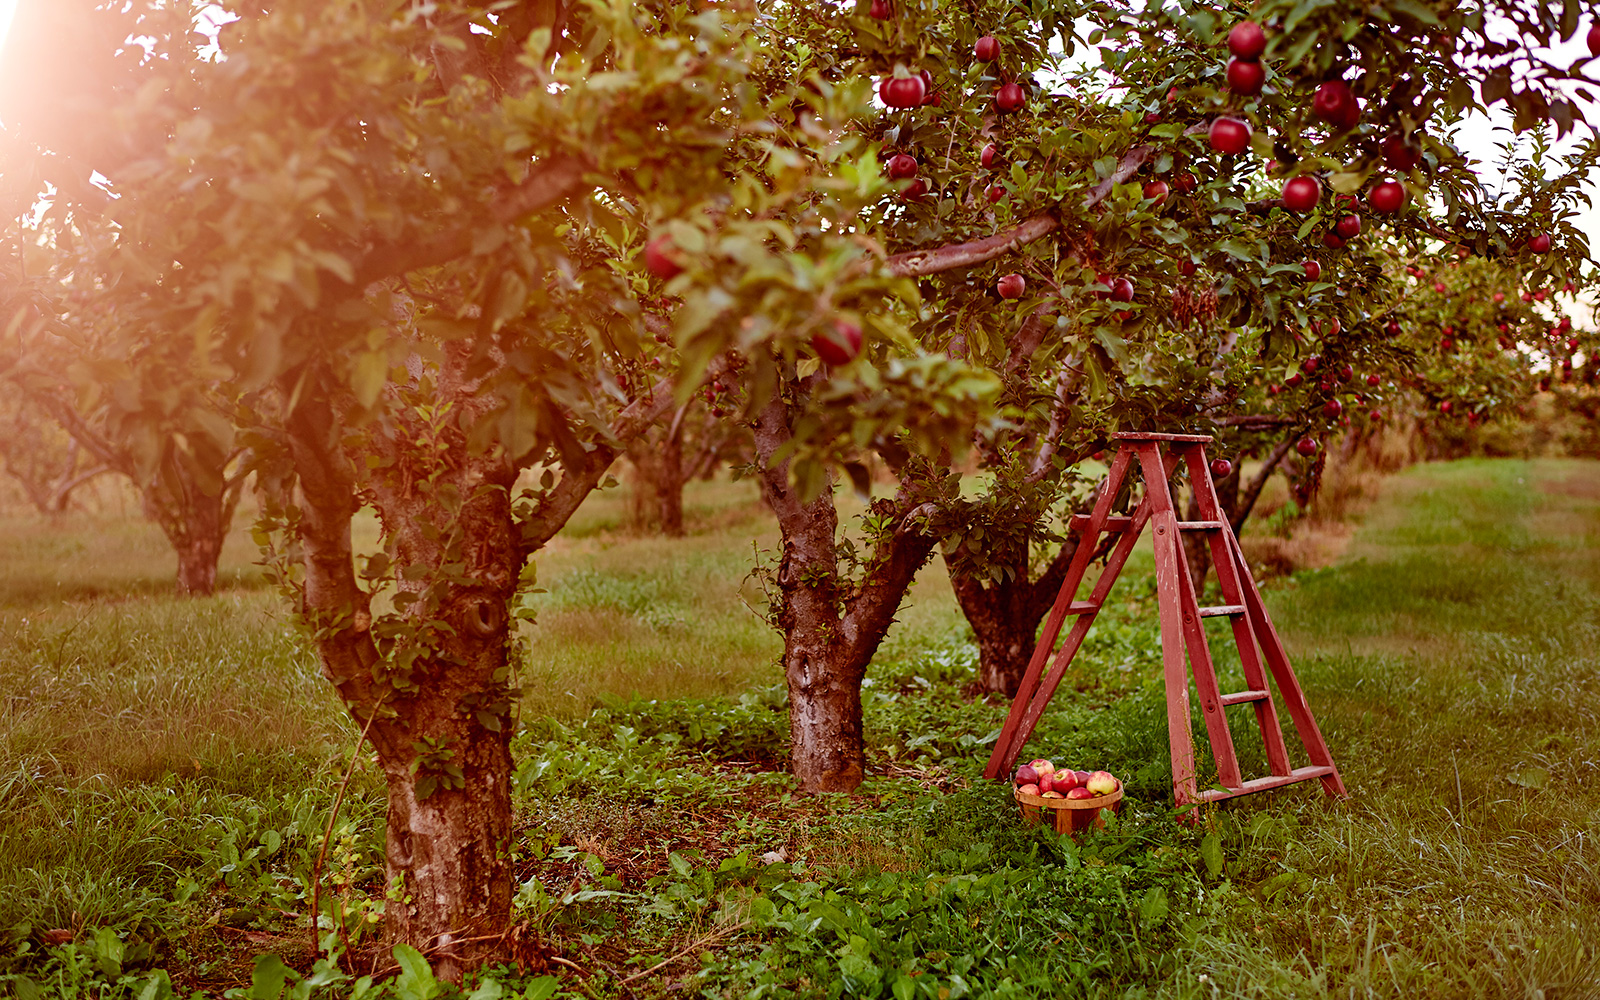 U-pick orchard near New Buffalo featuring two big apple trees and green grass with a ladder beside a tree